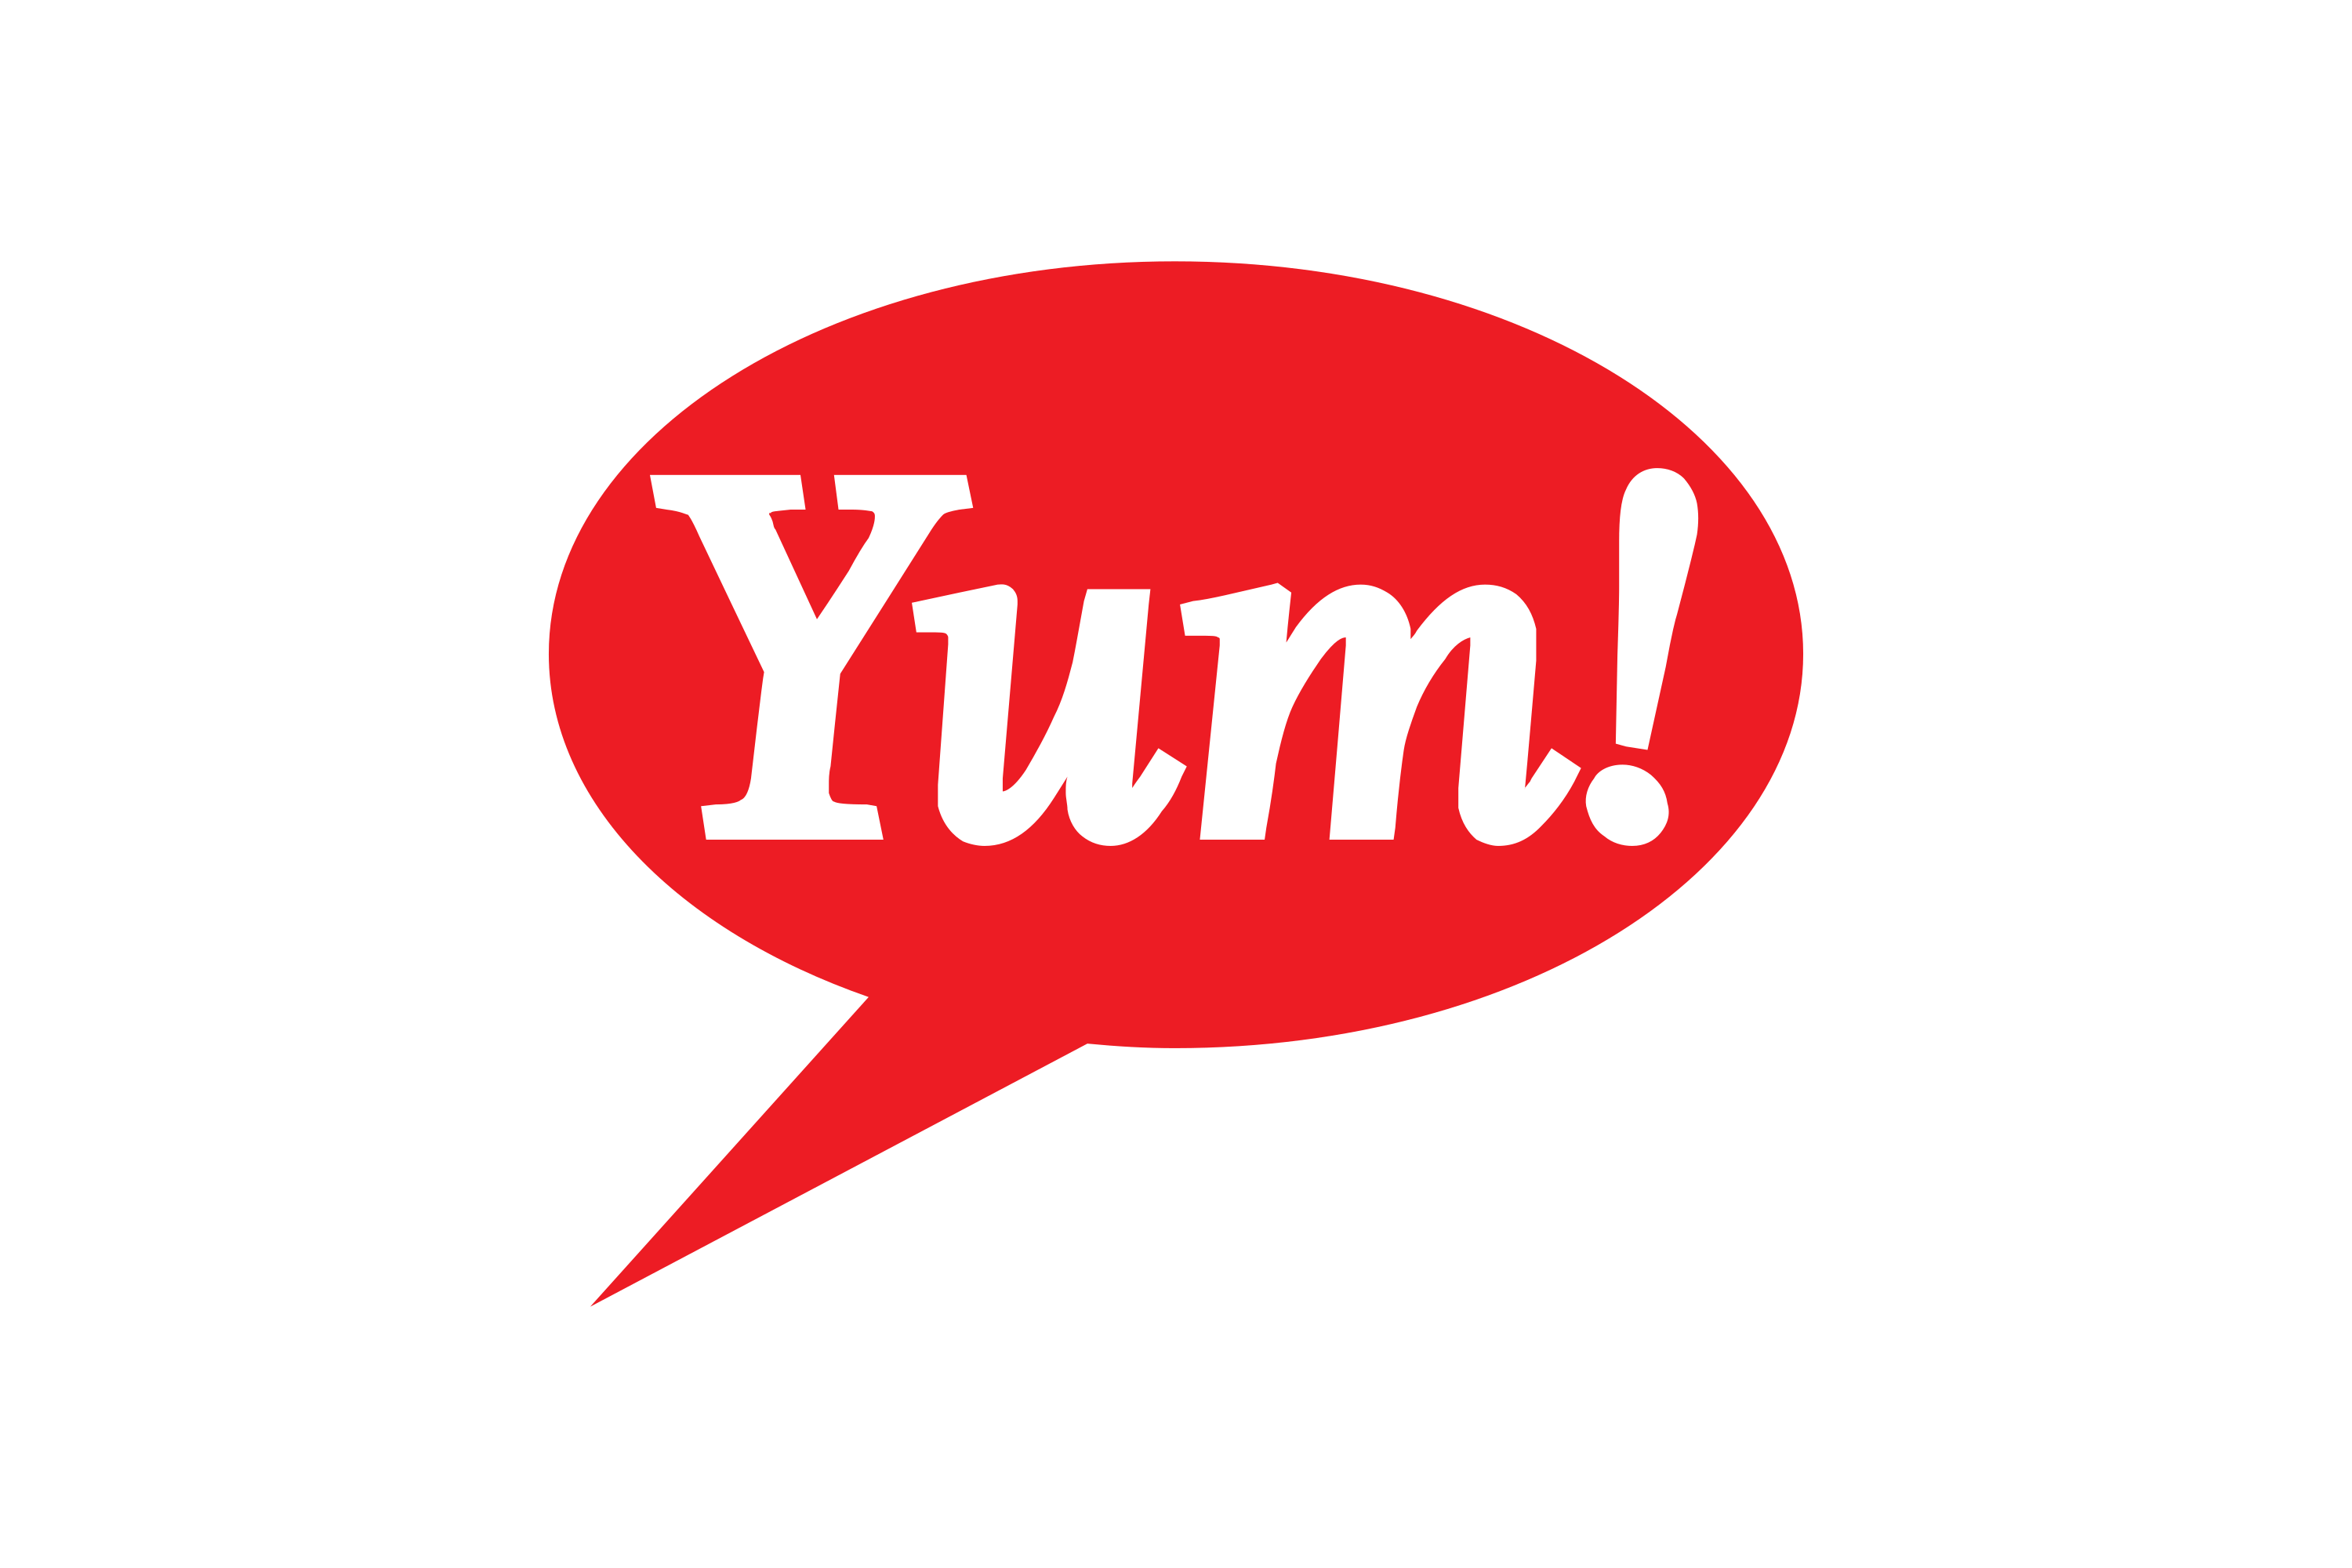 Download Yum! Brands Logo in SVG Vector or PNG File Format 